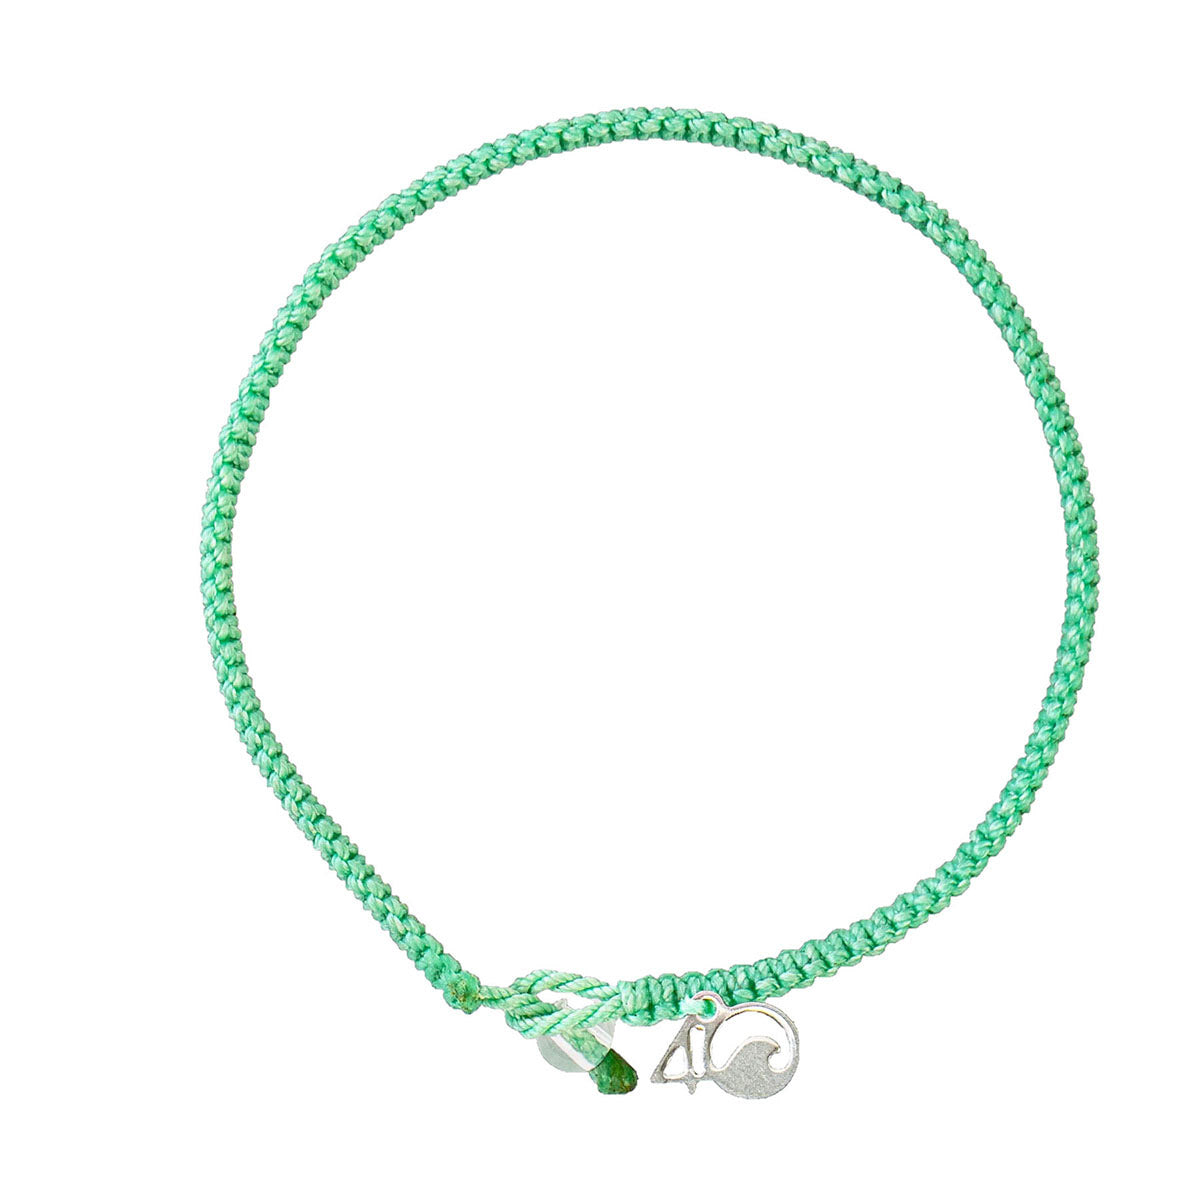 4Ocean Loggerhead Turtle Med bracelet, braided from recycled plastic bottle material, with silver charms and a green crystal.